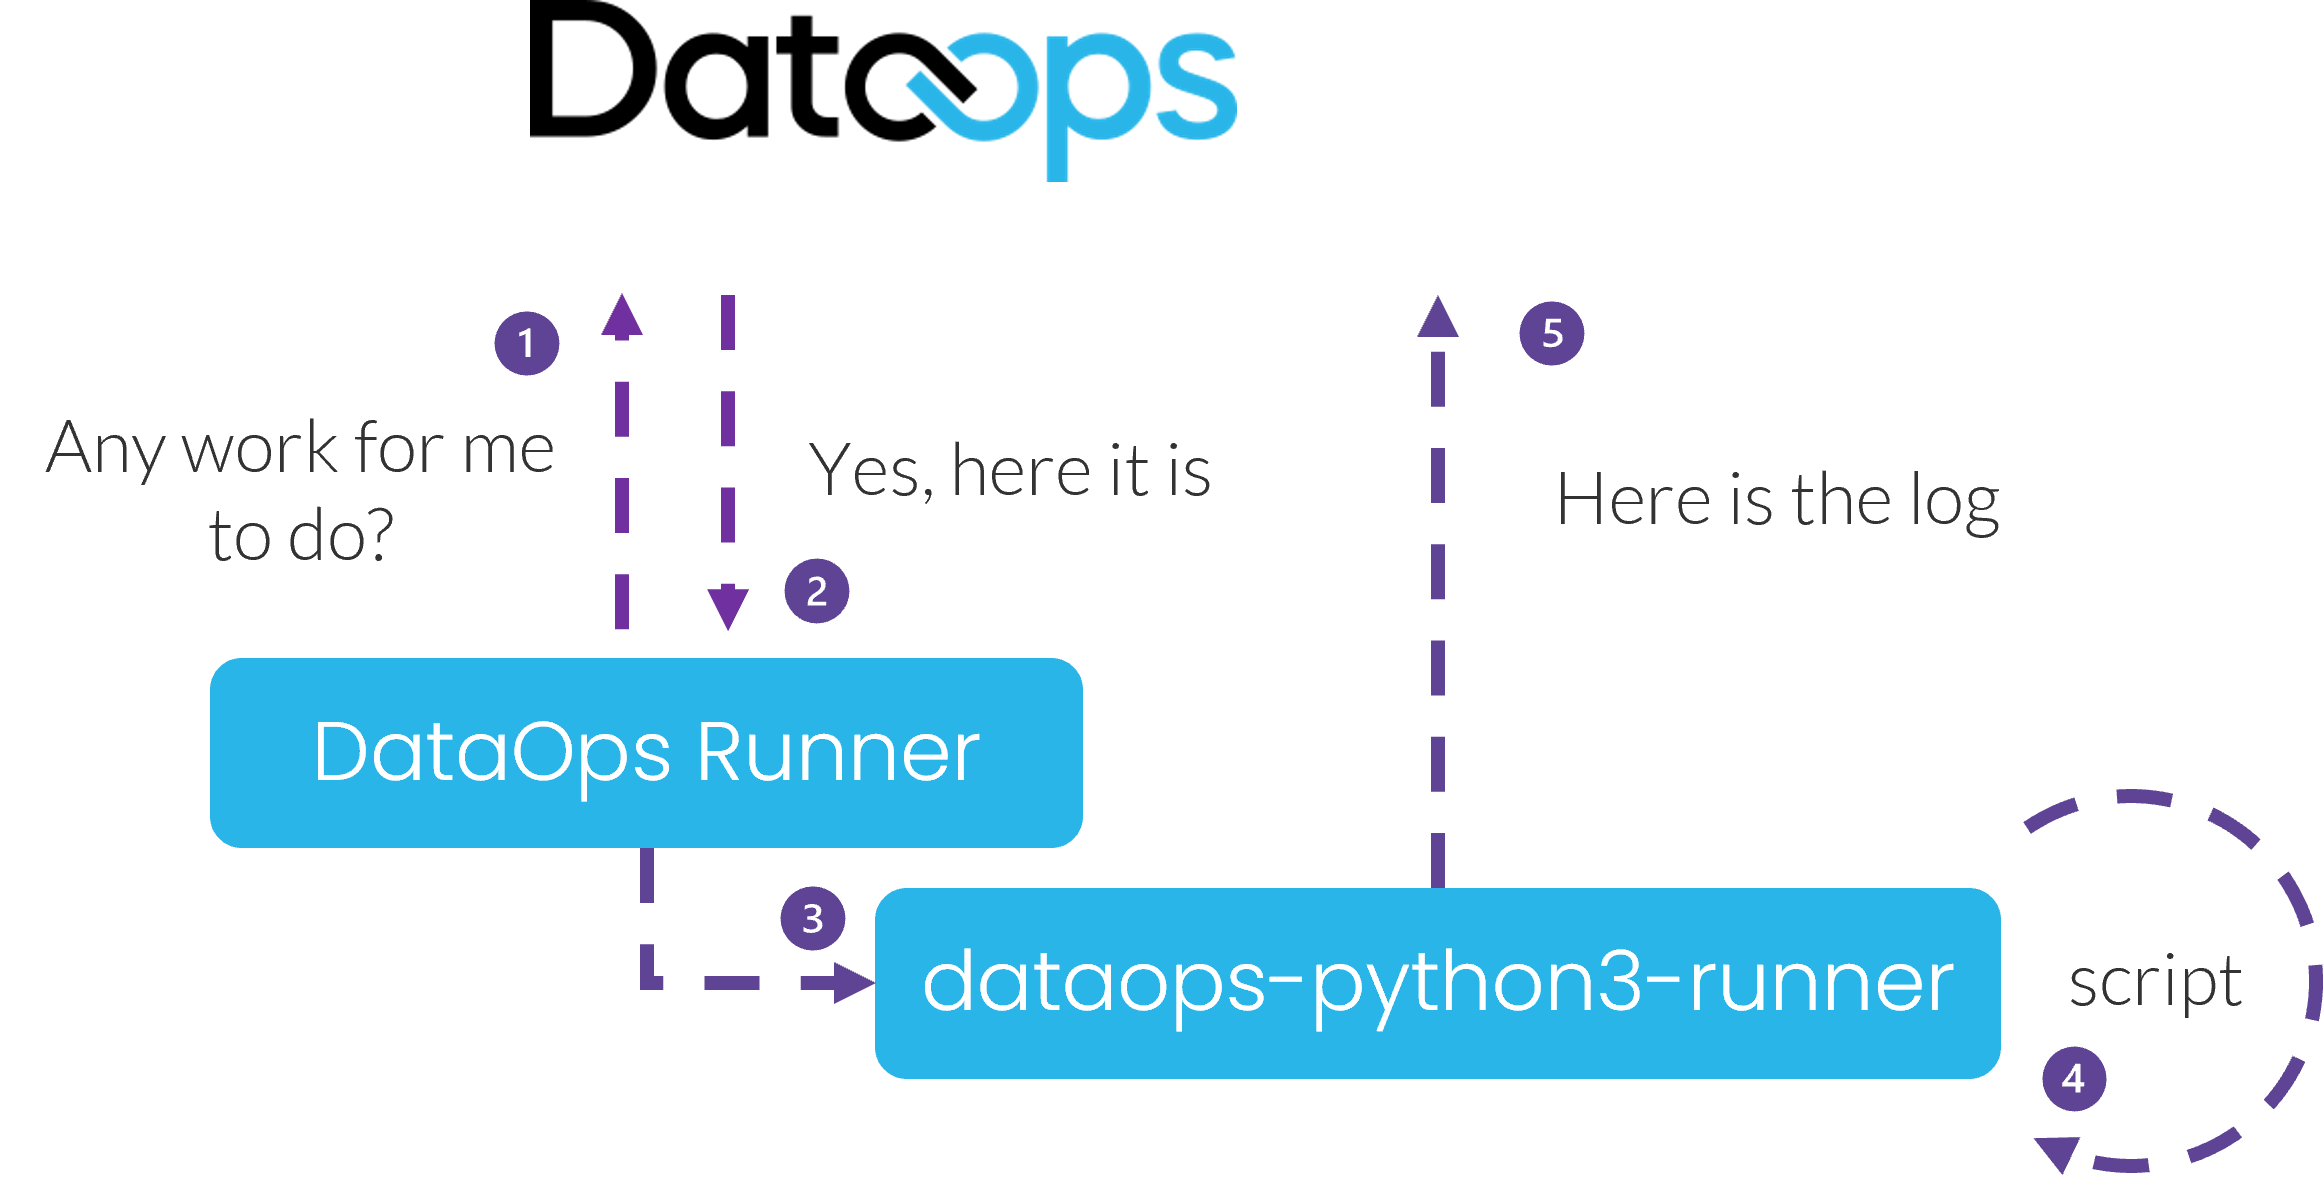 communication between DataOps app, the runner, and the orchestrators